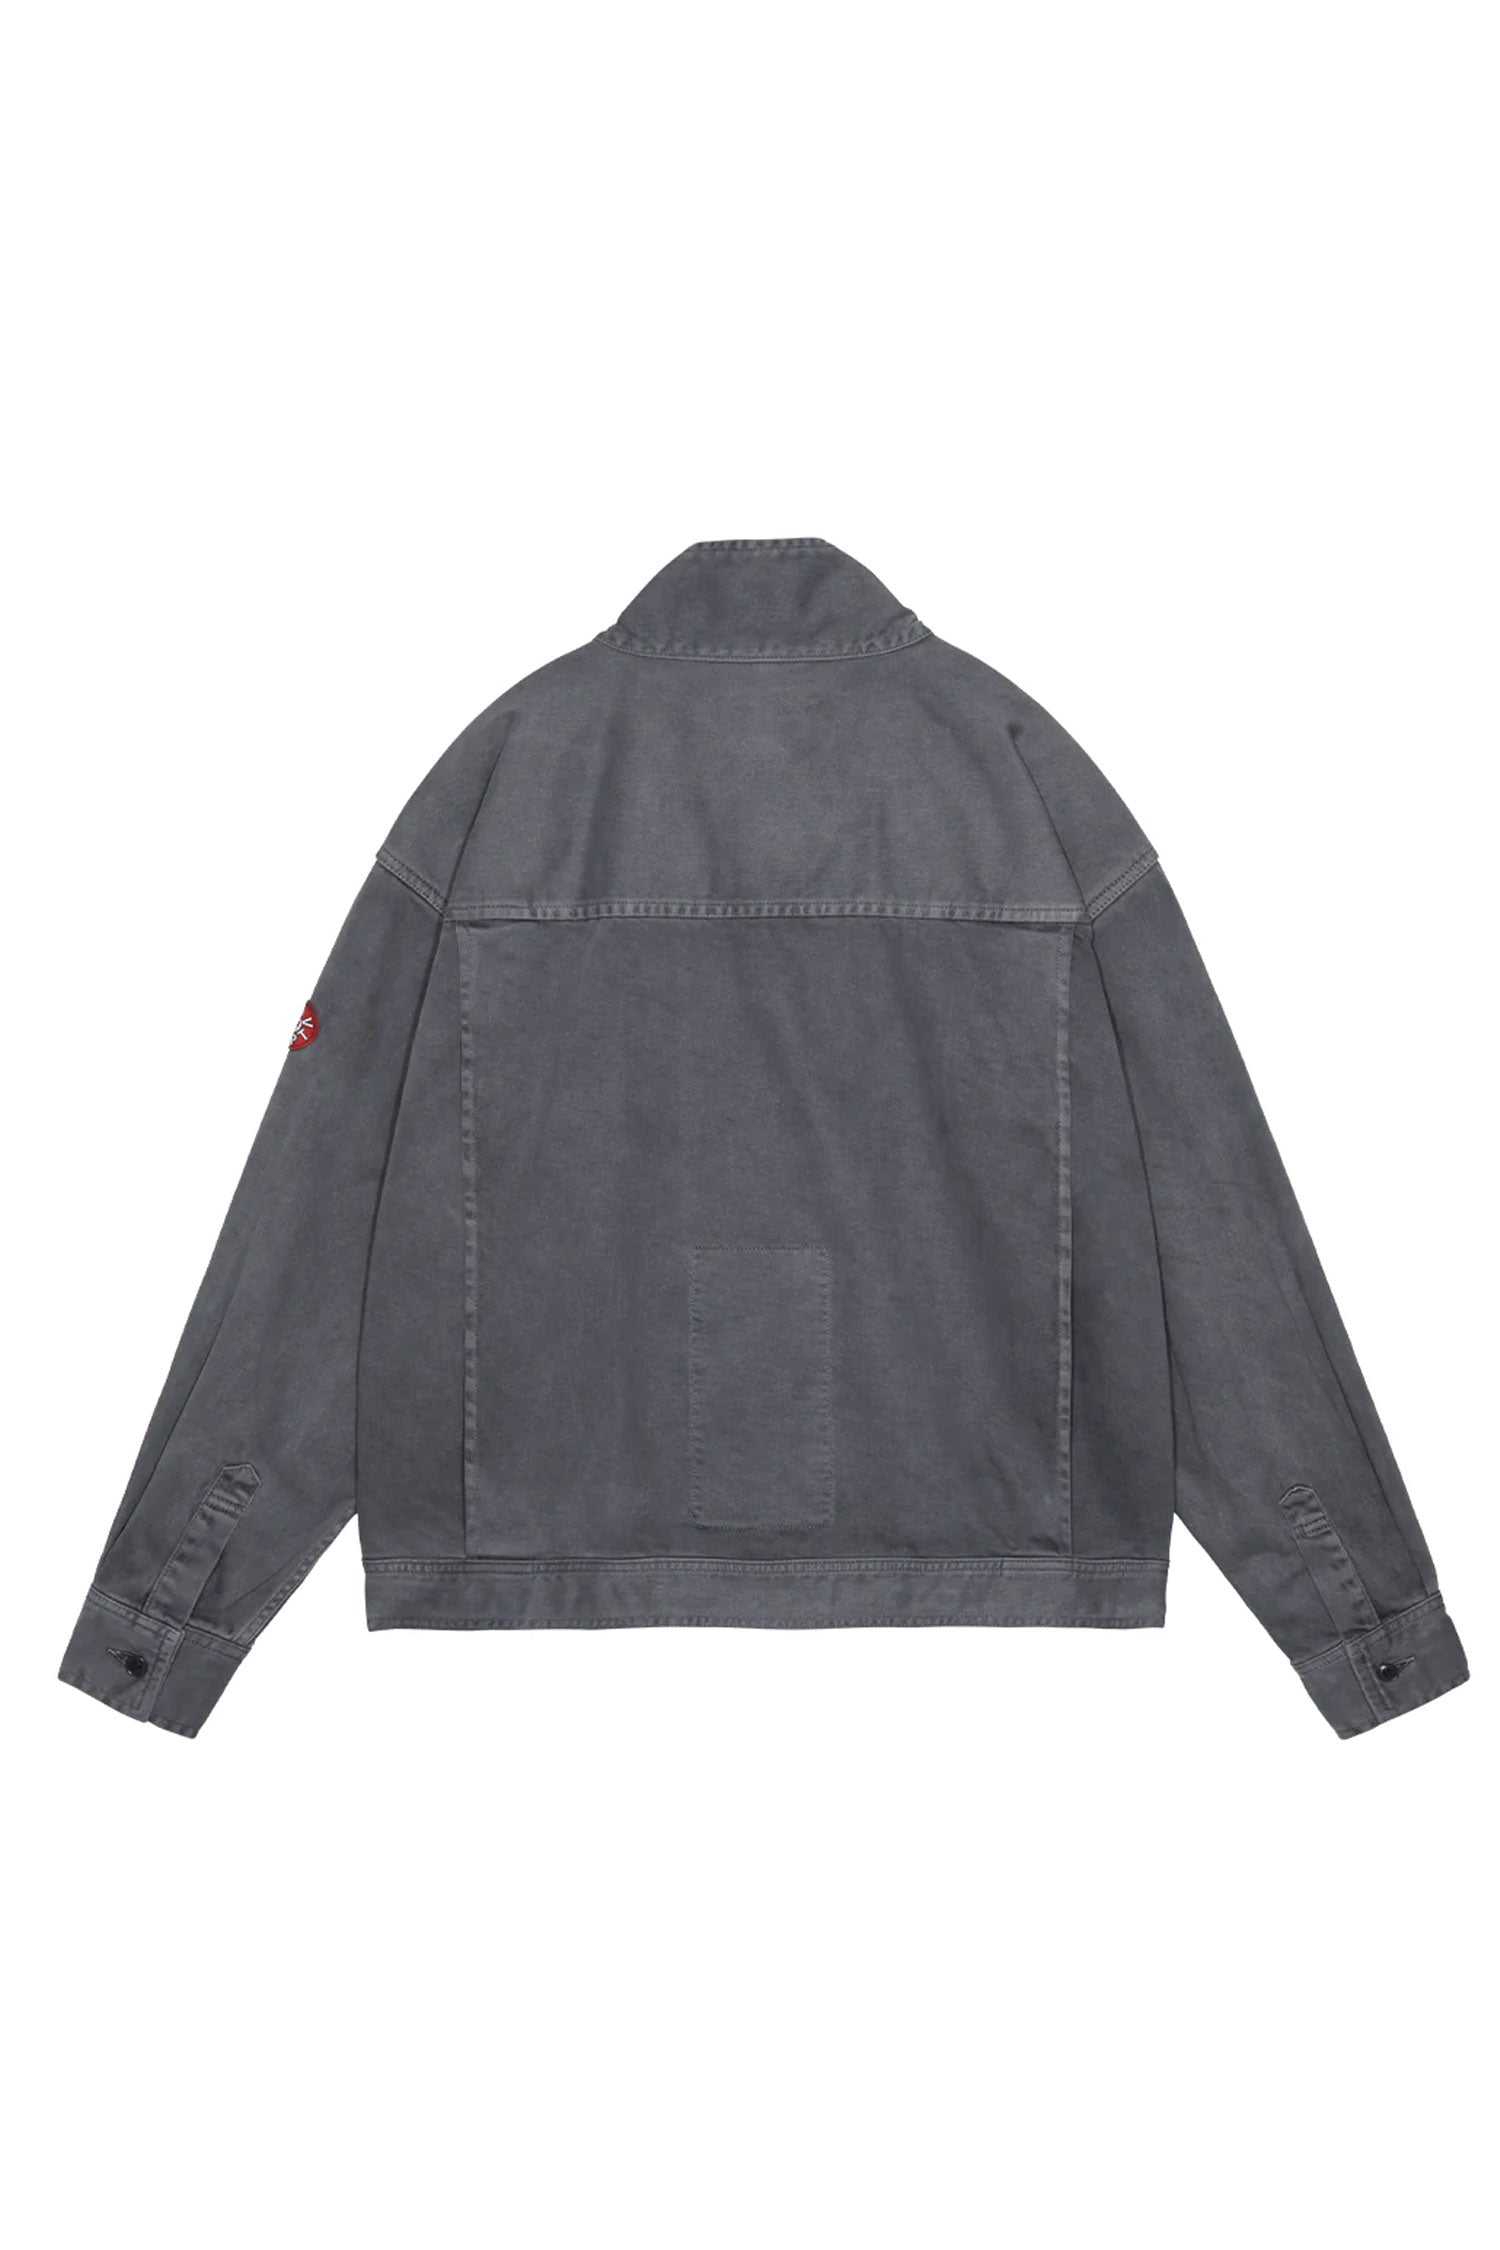 The CAV EMPT - BRUSHED SOFT COTTON JACKET  available online with global shipping, and in PAM Stores Melbourne and Sydney.